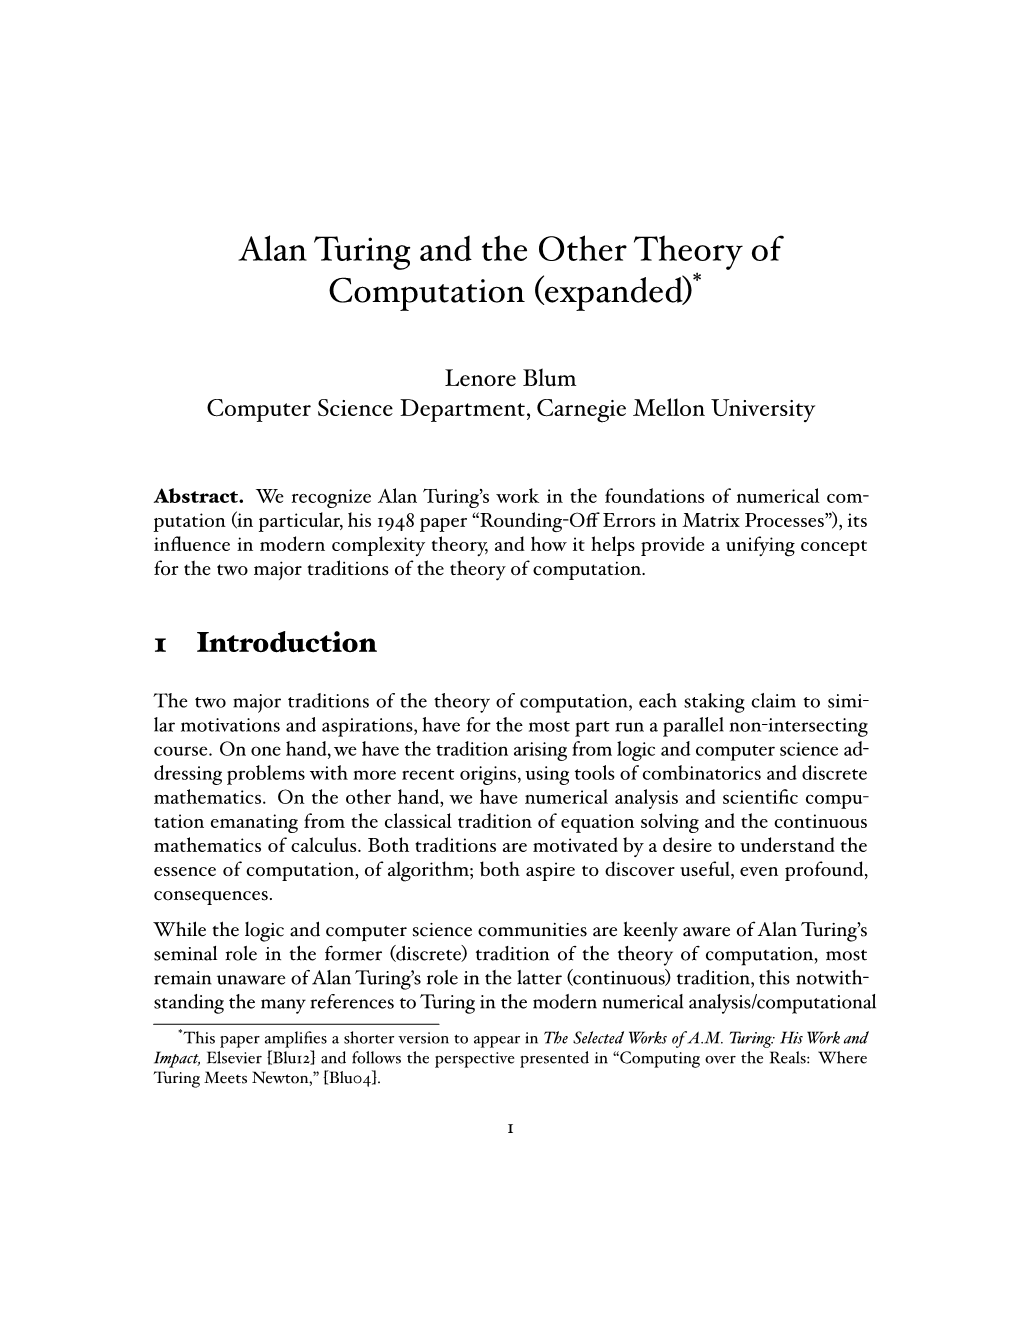 Alan Turing and the Other Theory of Computation (Expanded)*